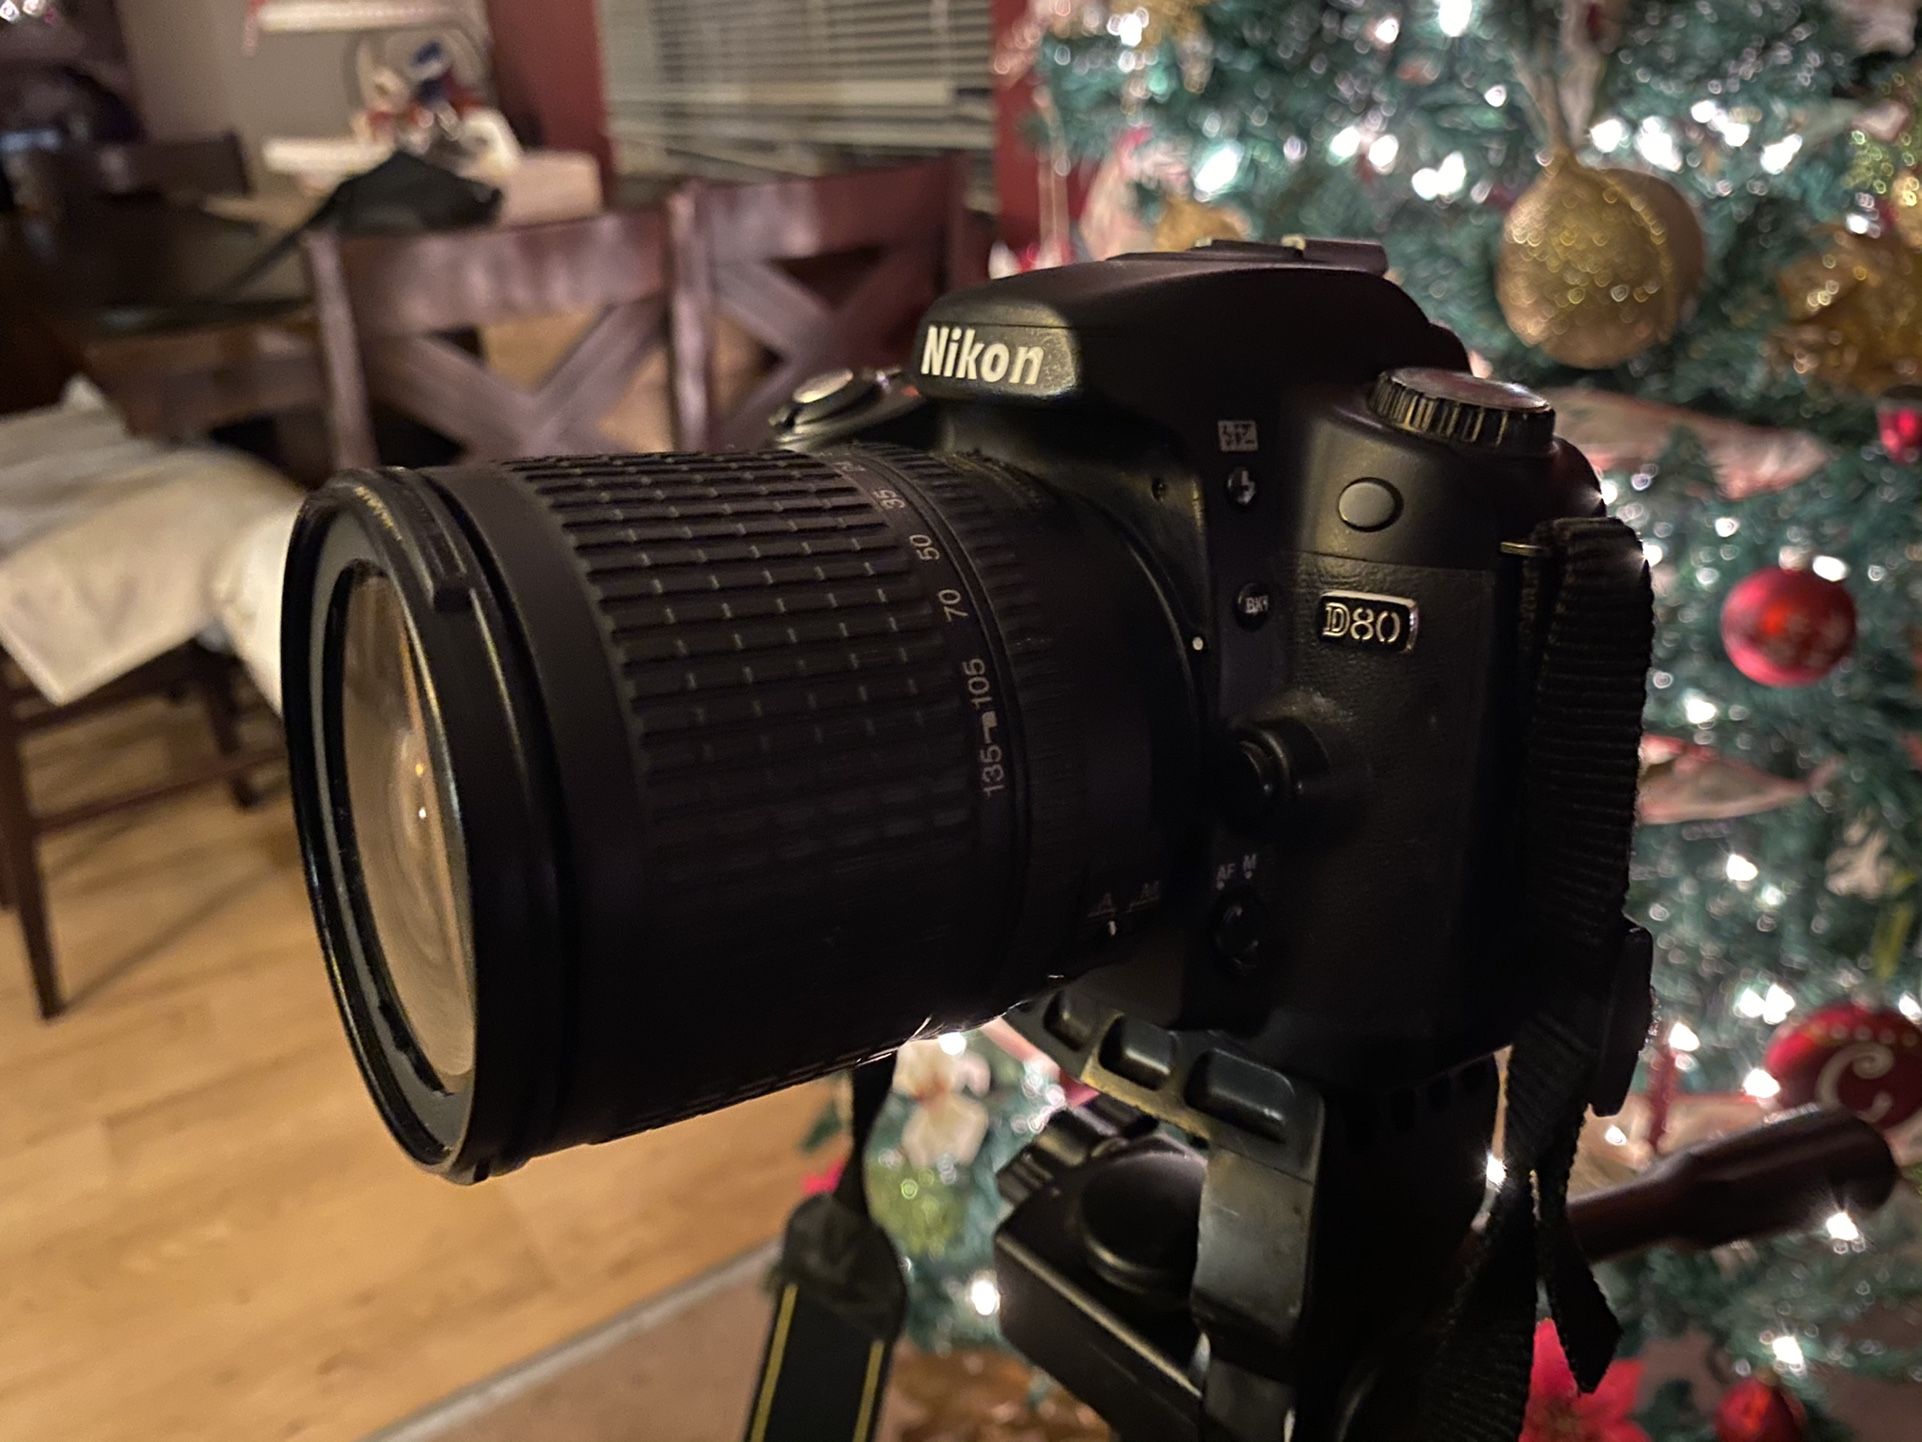 Nikon D80 Camera And Stand